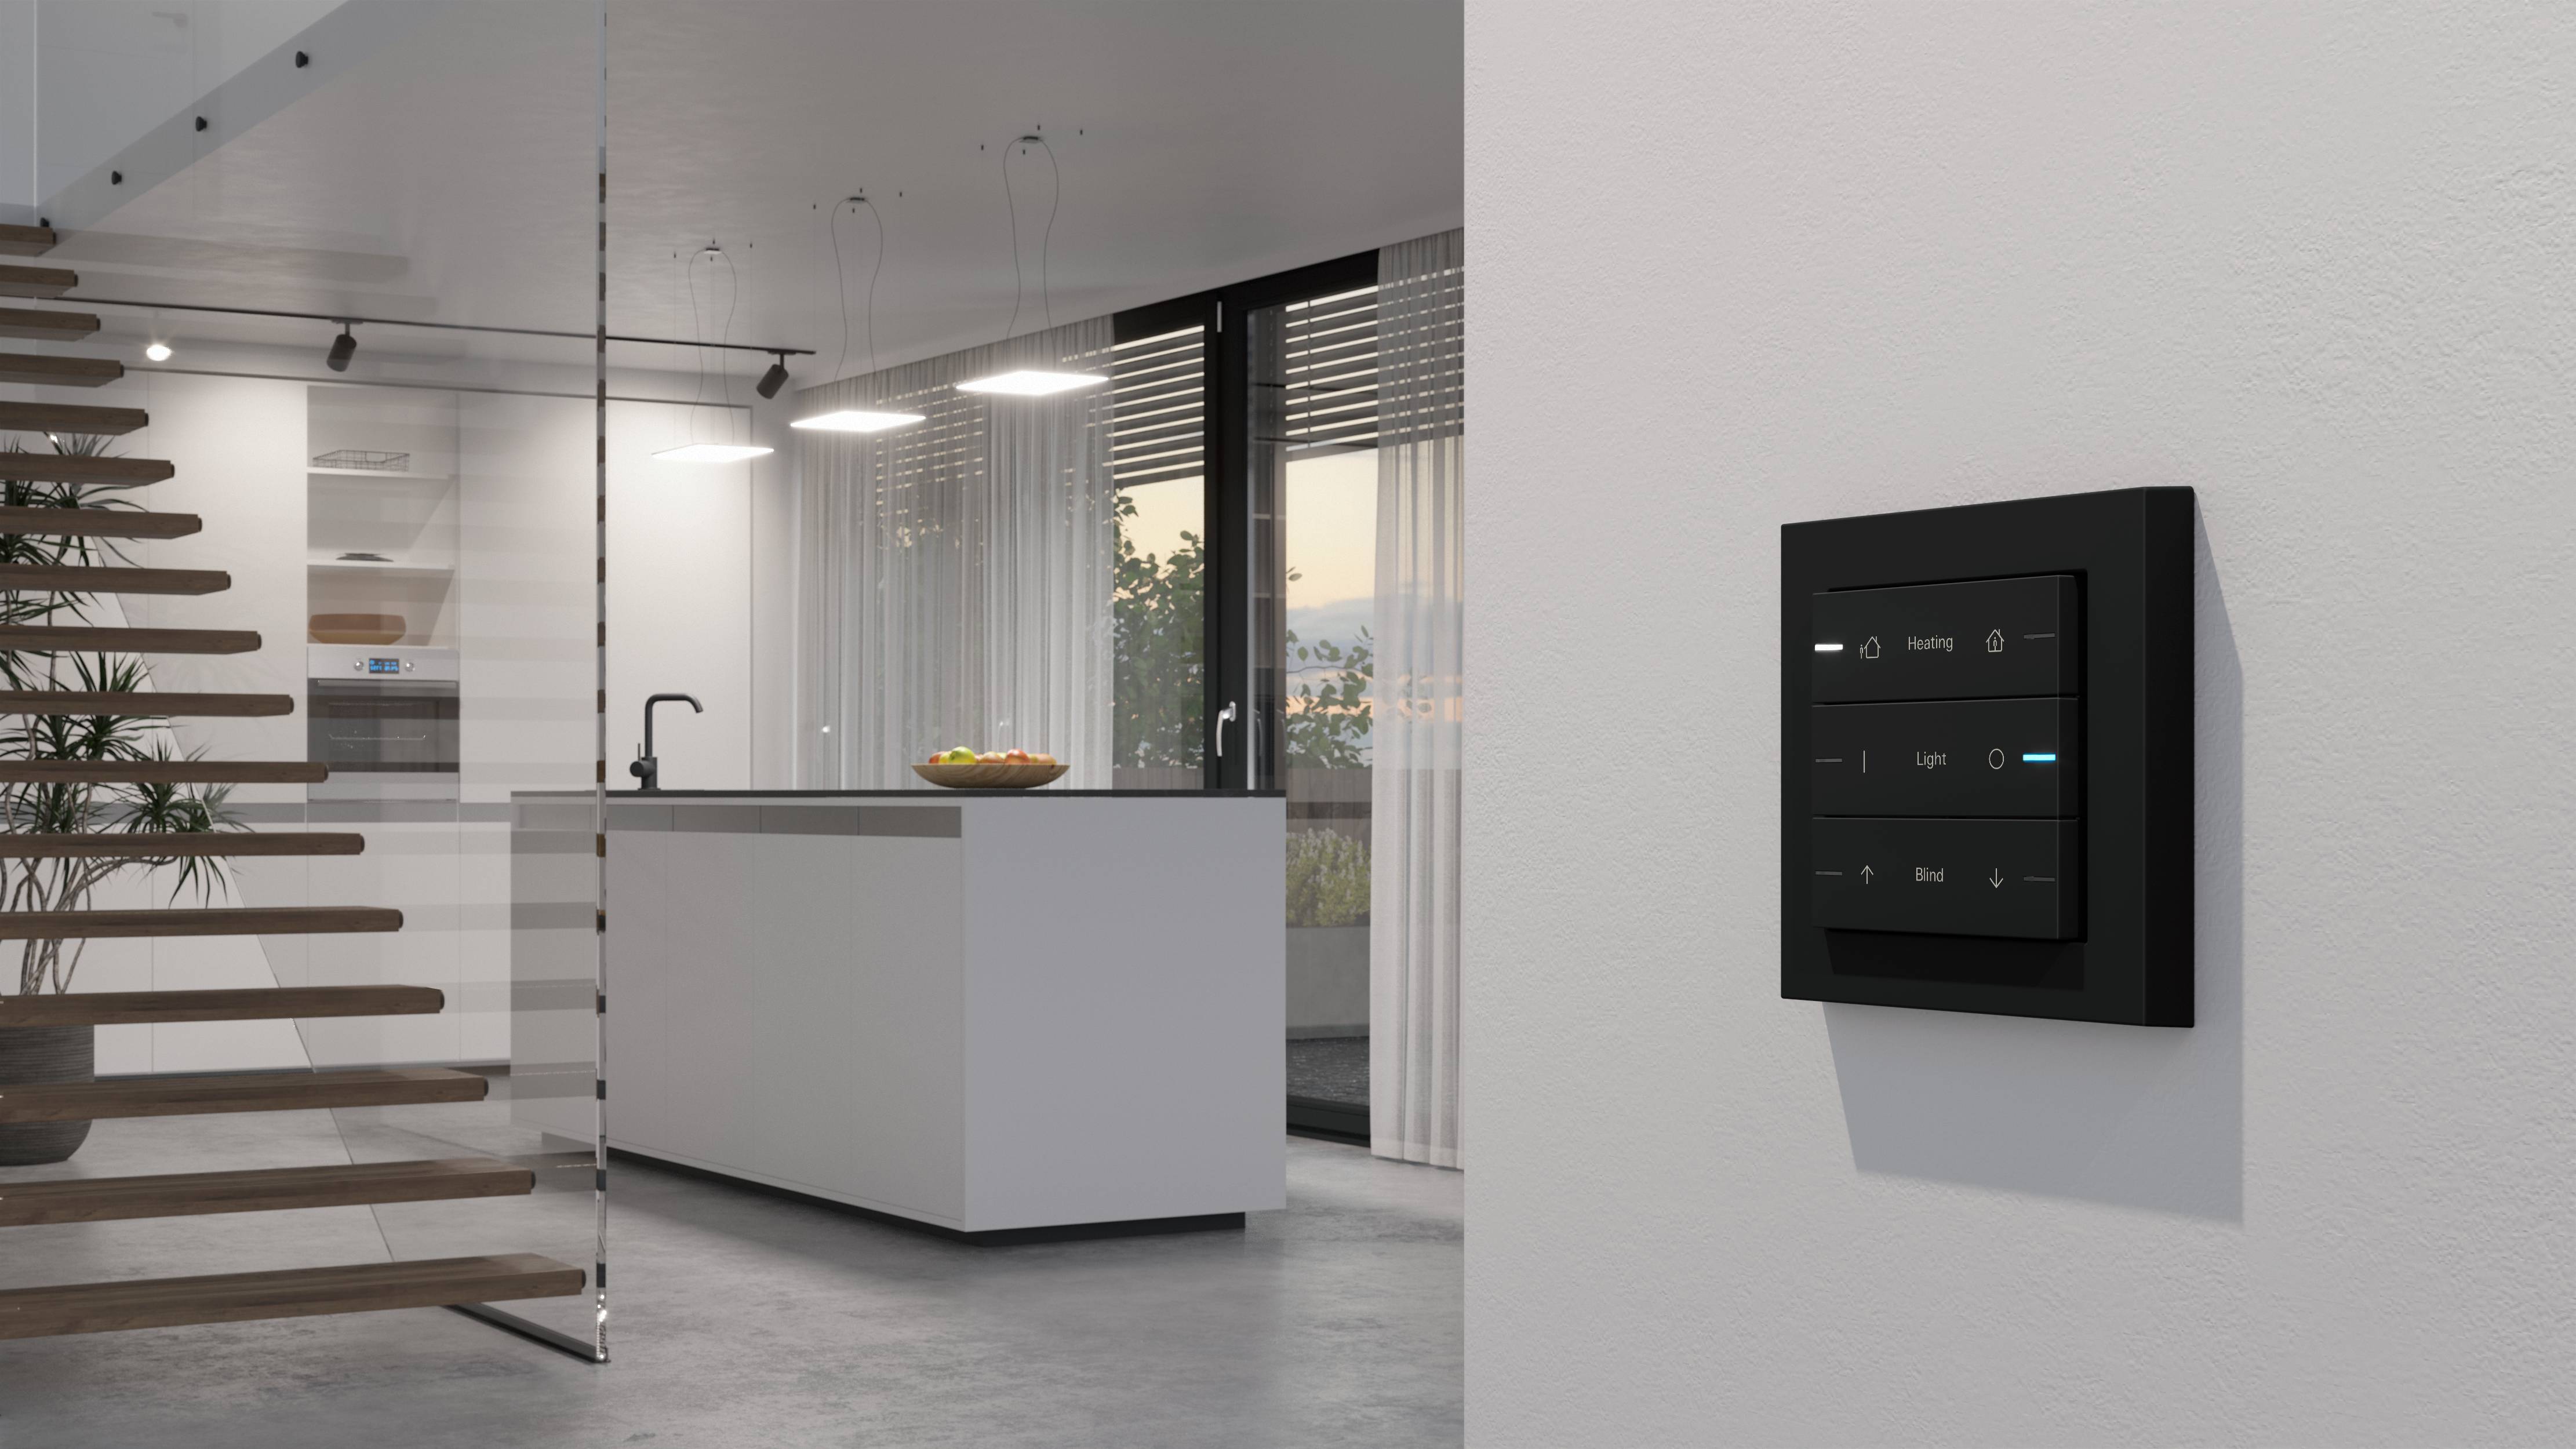 As a component of Gira System 55, the Gira pushbutton sensor 4 combines smart KNX convenience with a broad range of different designs. More about the product. ➤